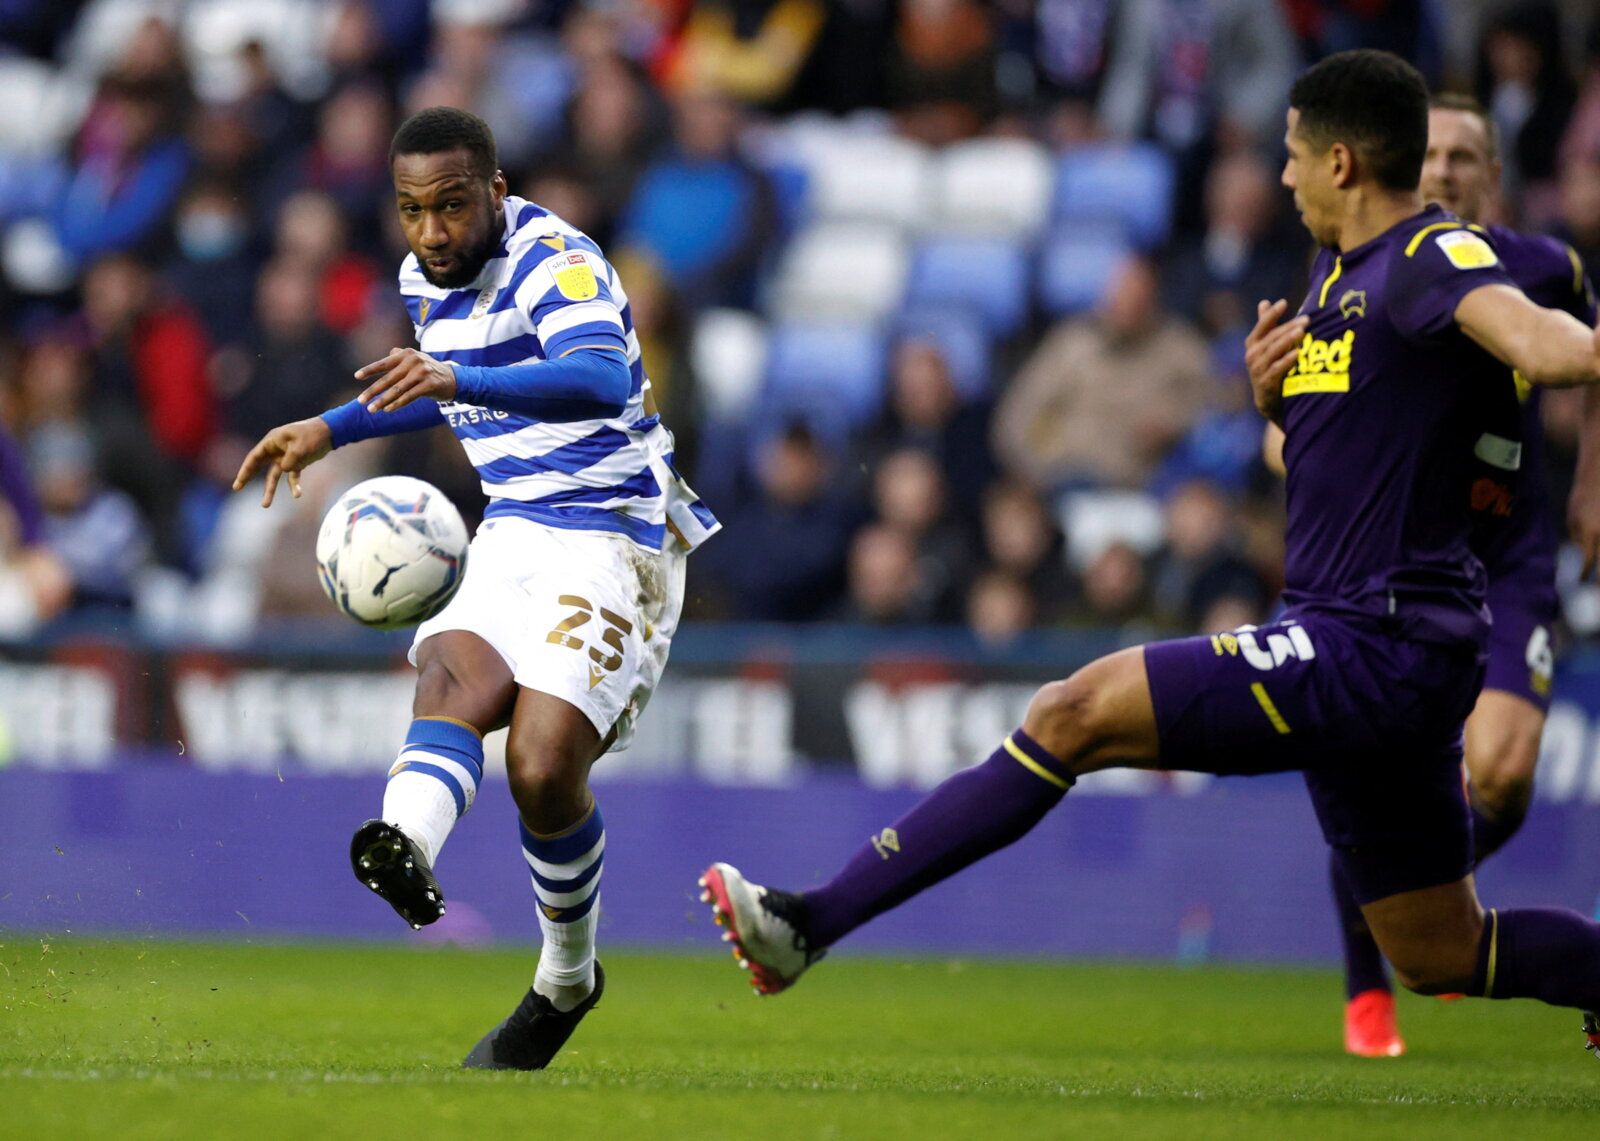 Soccer Football - Championship - Reading v Derby County - Madejski Stadium, Reading, Britain - January 3, 2022 Reading's Junior Hoilett scores their first goal Action Images/John Sibley??EDITORIAL USE ONLY. No use with unauthorized audio, video, data, fixture lists, club/league logos or 